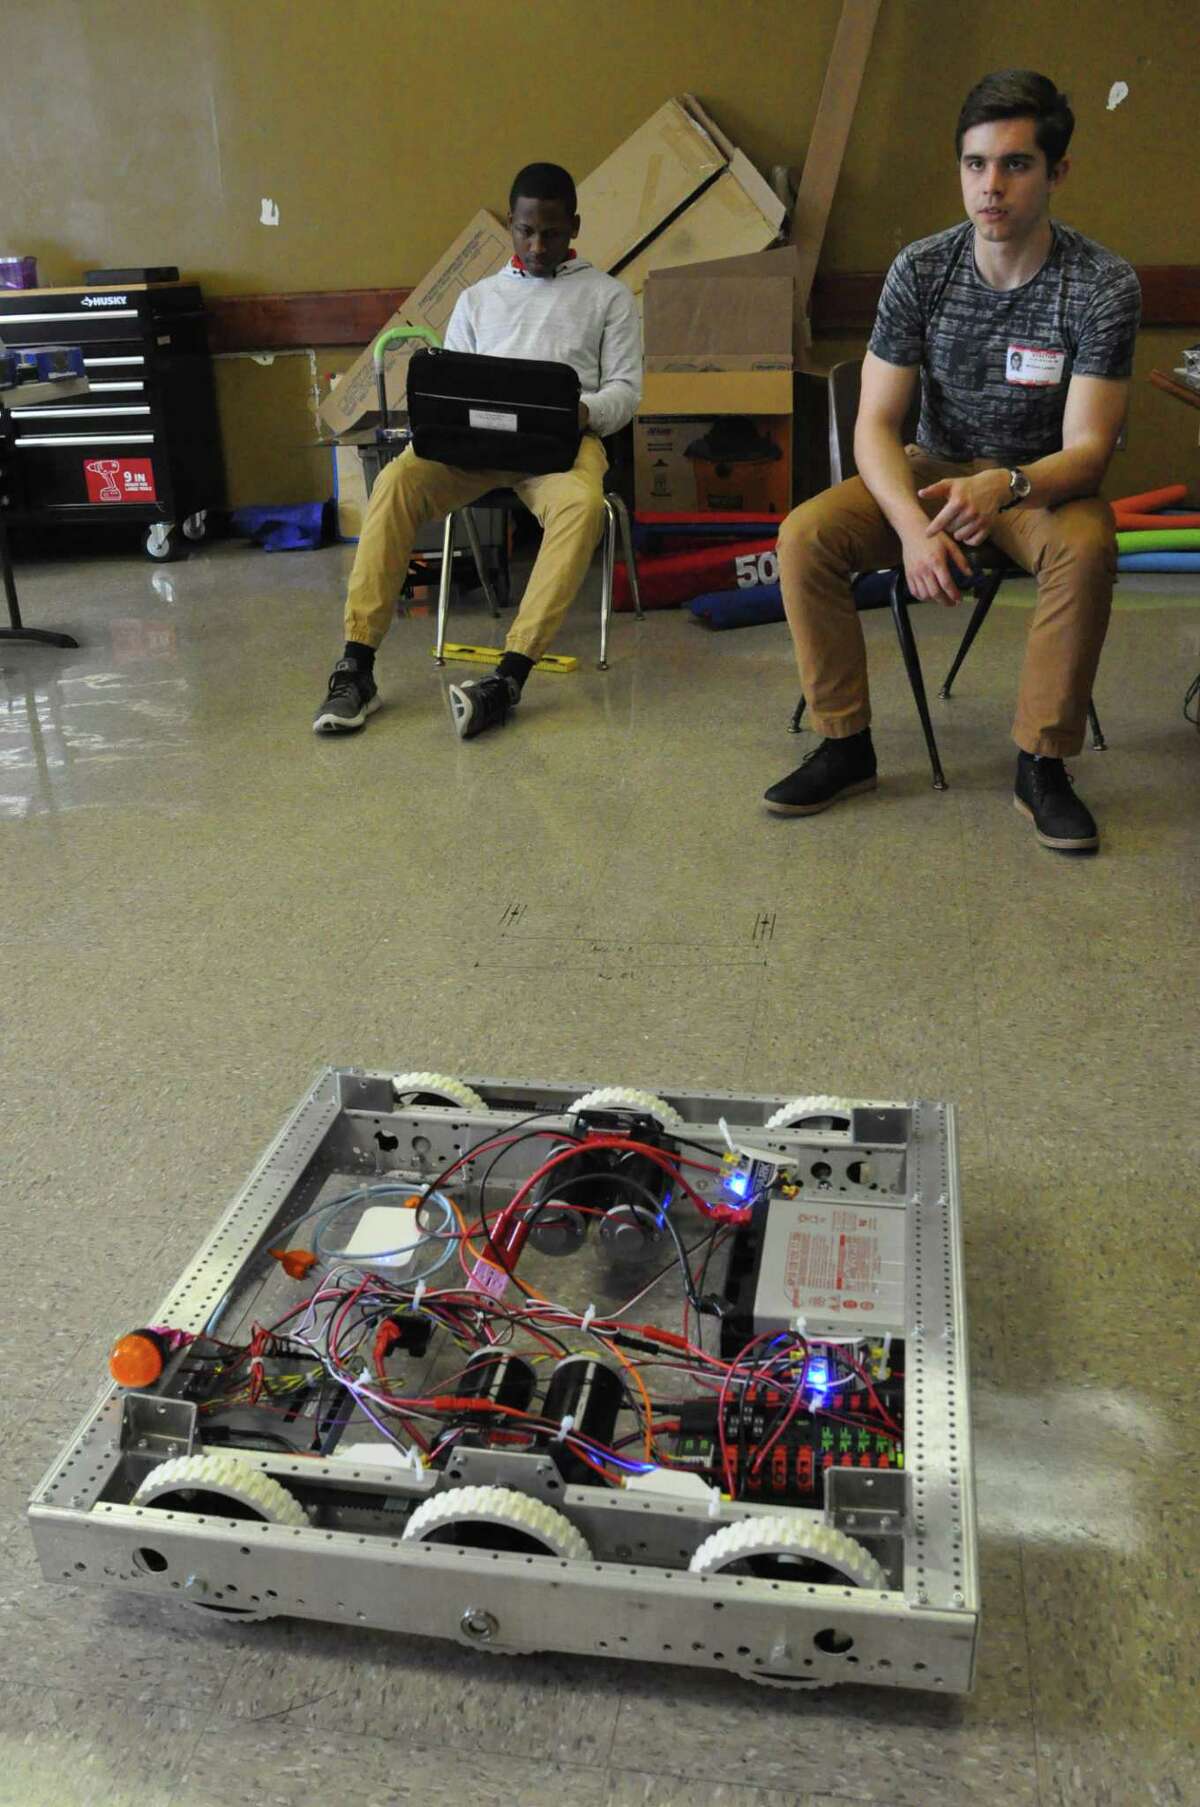 Rashard Randall, a member of the Yates High School robotics team and Rice University mentor Cannon Lewis watch as their entry in the FIRST Robotics competition maneuvers in their classroom. This is the first year that a team from Yates High School has built a robot for the FIRST Robotics competition. The FIRST World Championship at the George R. Brown Convention Center from April 15-18, which is free and open to the public.